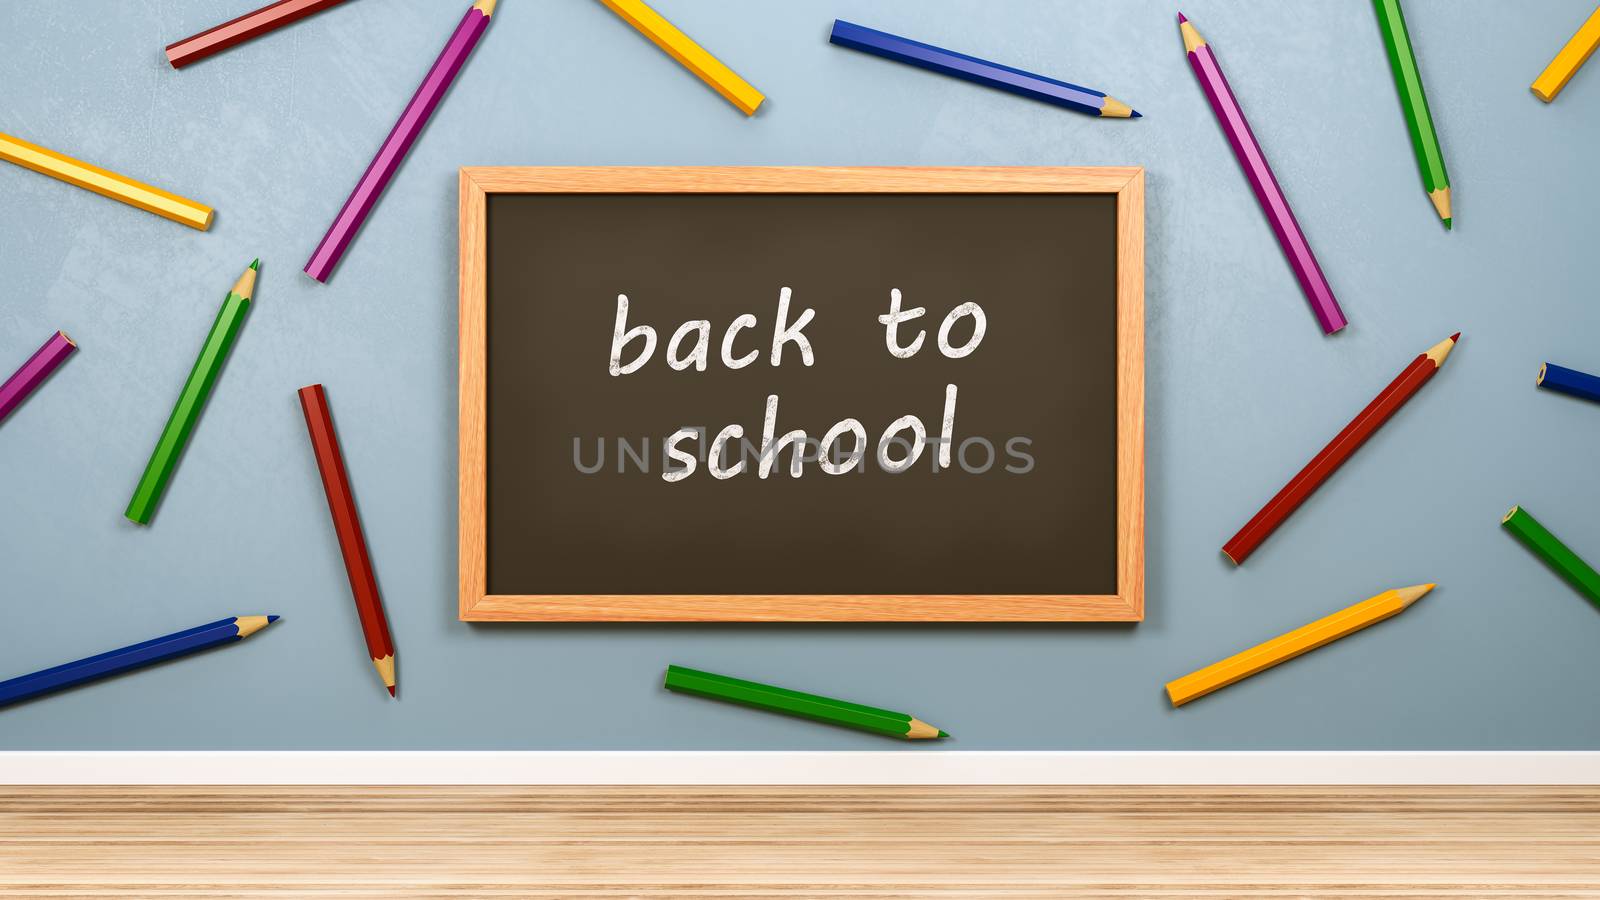 Blackboard with Back to School Text and Colorful Wooden Pencils at the Wall 3D Render